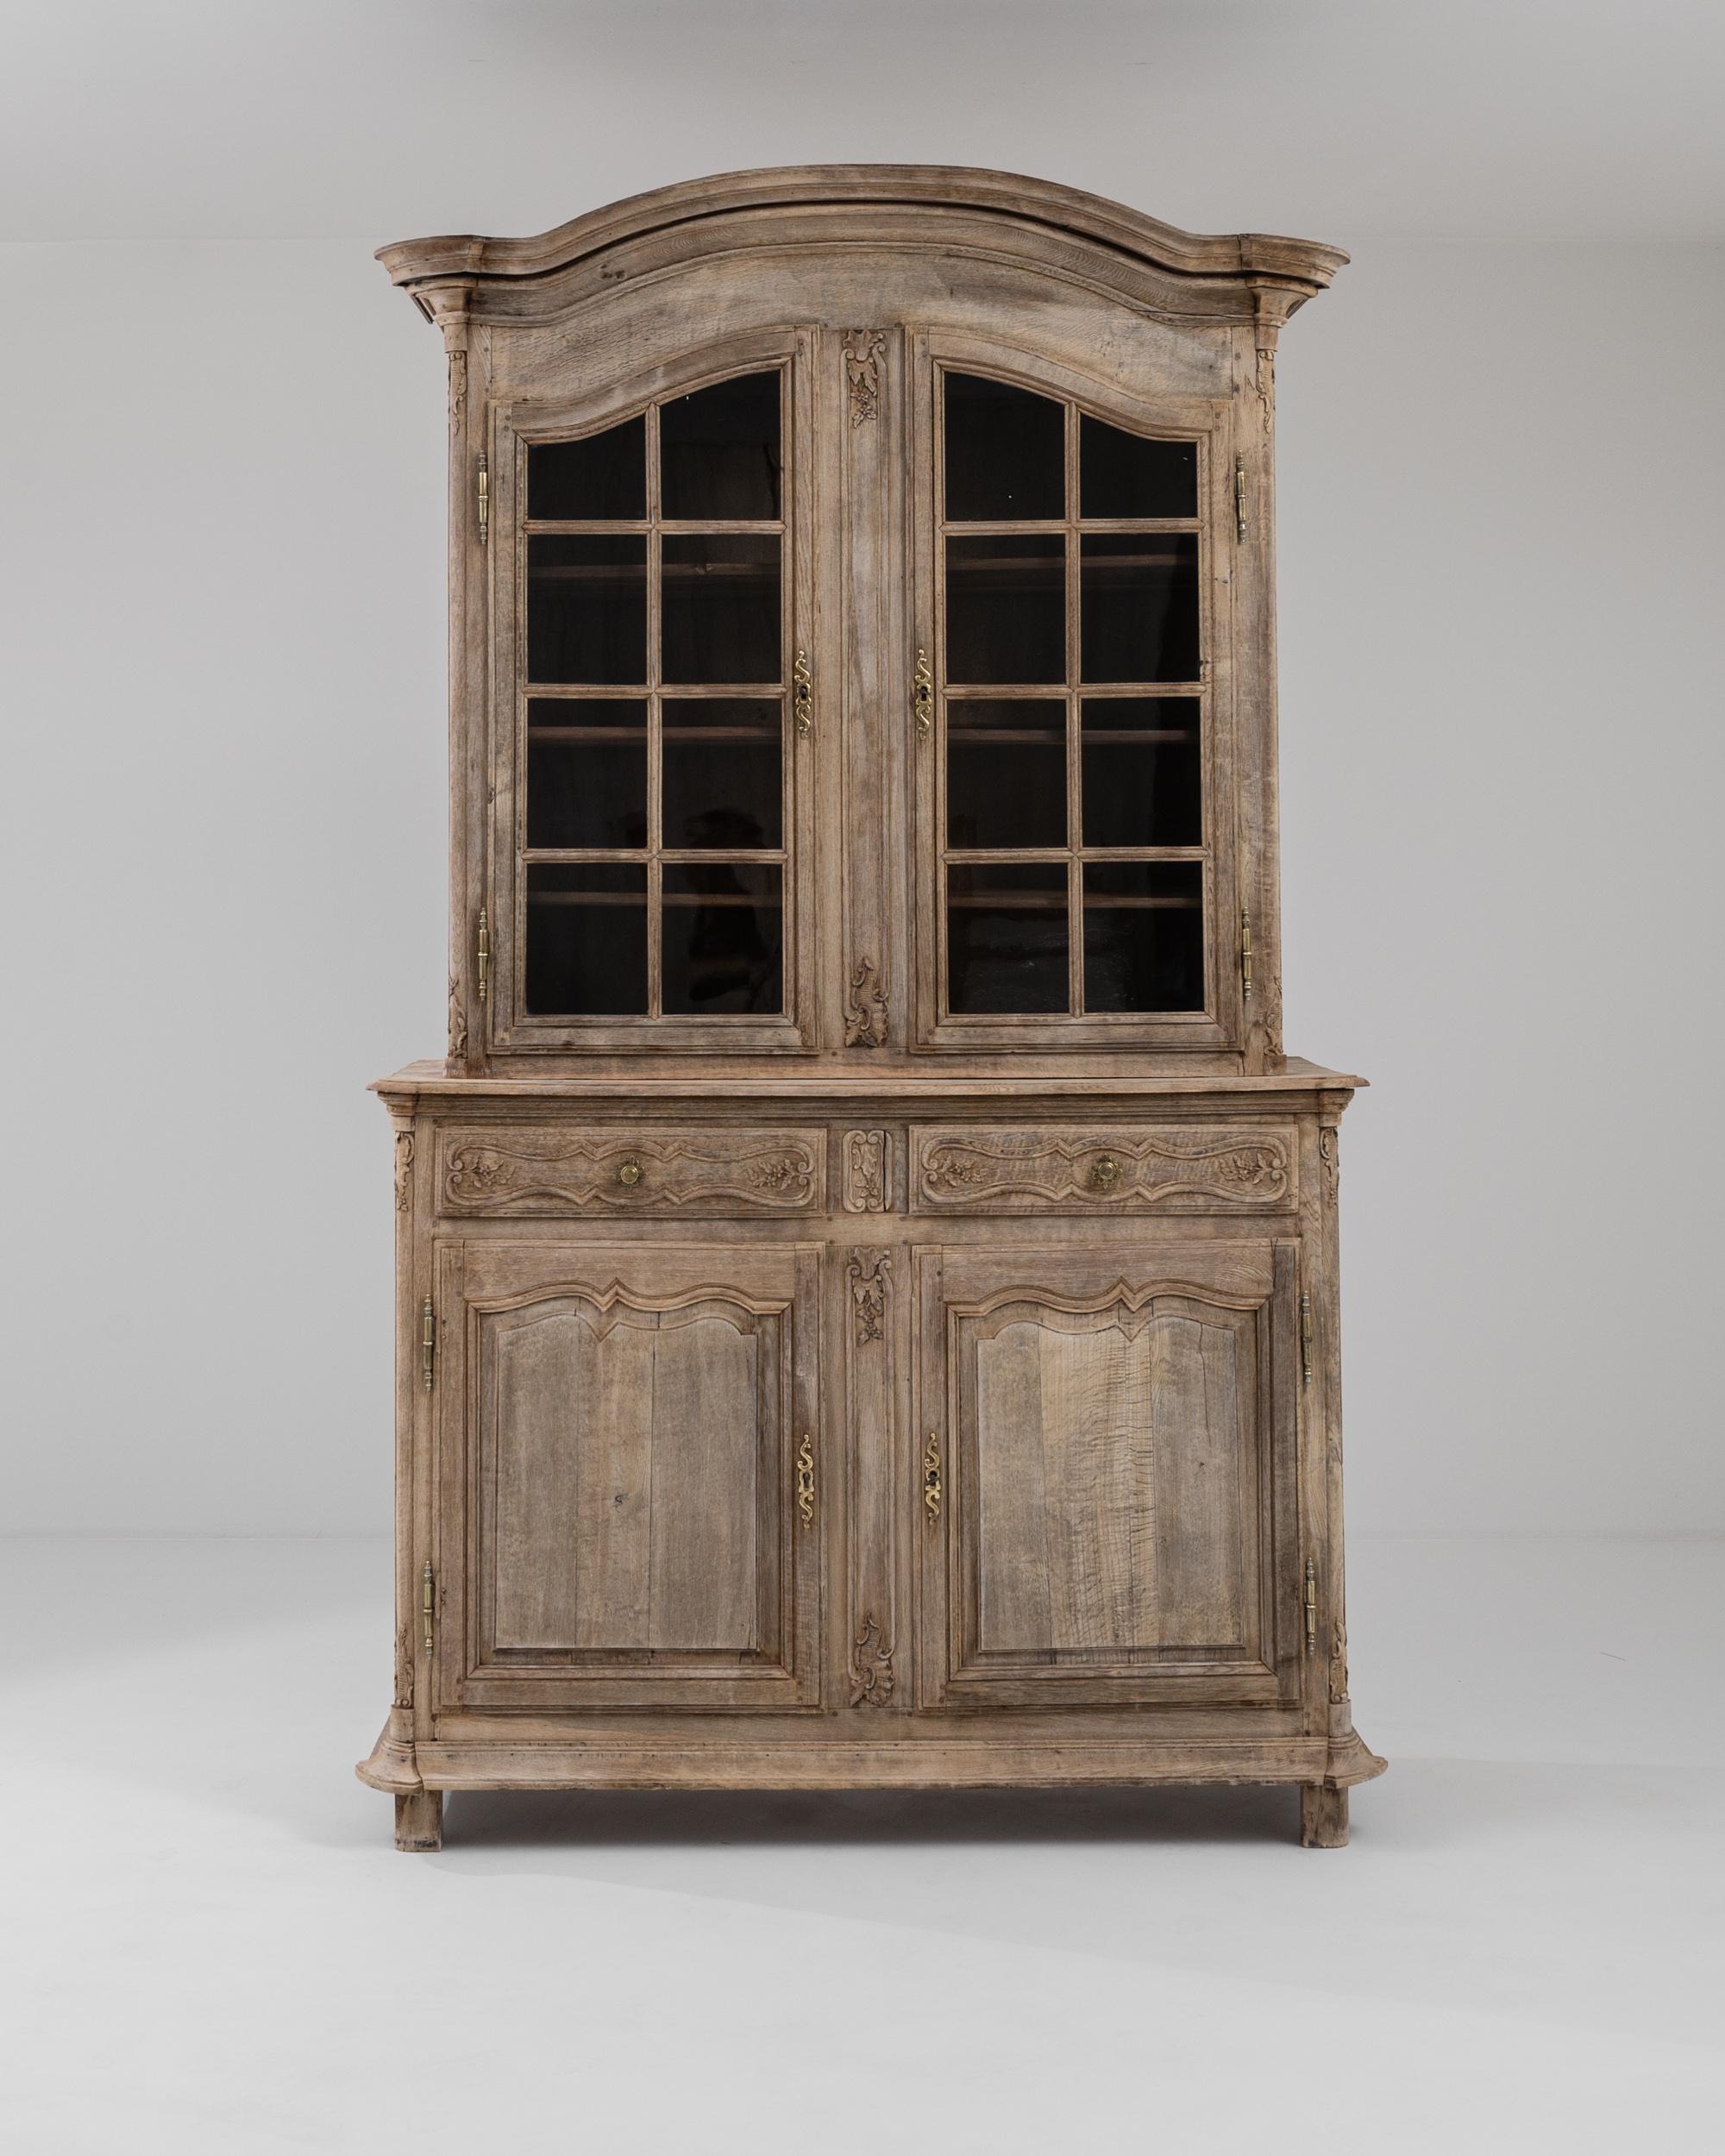 A wooden vitrine made in 19th century, France. This hulking display cabinet features two lower doors and two drawers, the glazed cabinet above houses four shelves. Providing a wealth of storage and an undeniable charm, this vitrine brings a unique